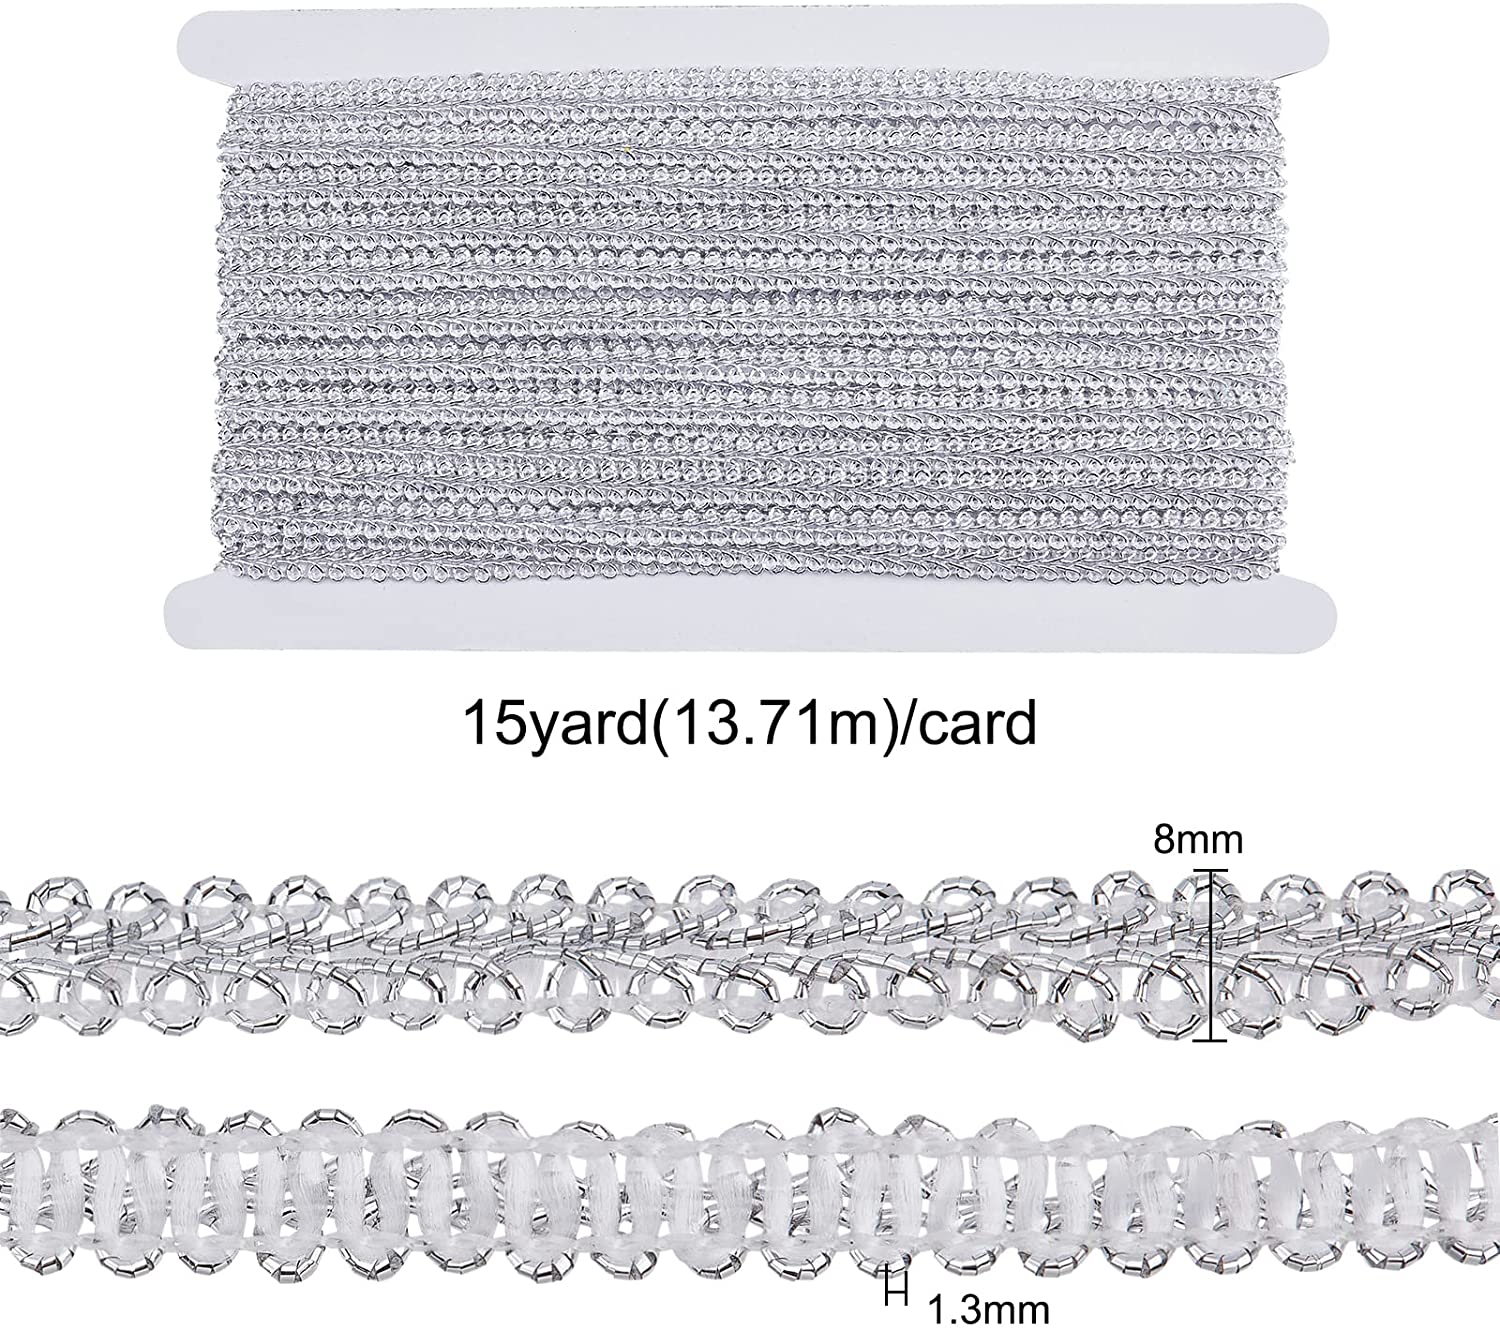 15 Yards Metallic Braid Lace Trim, Flower Pattern Silver Centipede Lace Ribbon Decorated Gimp Trim for Wedding Bridal, Costume or Jewelry, Crafts and Sewing 1/4(8mm) x1.3mm